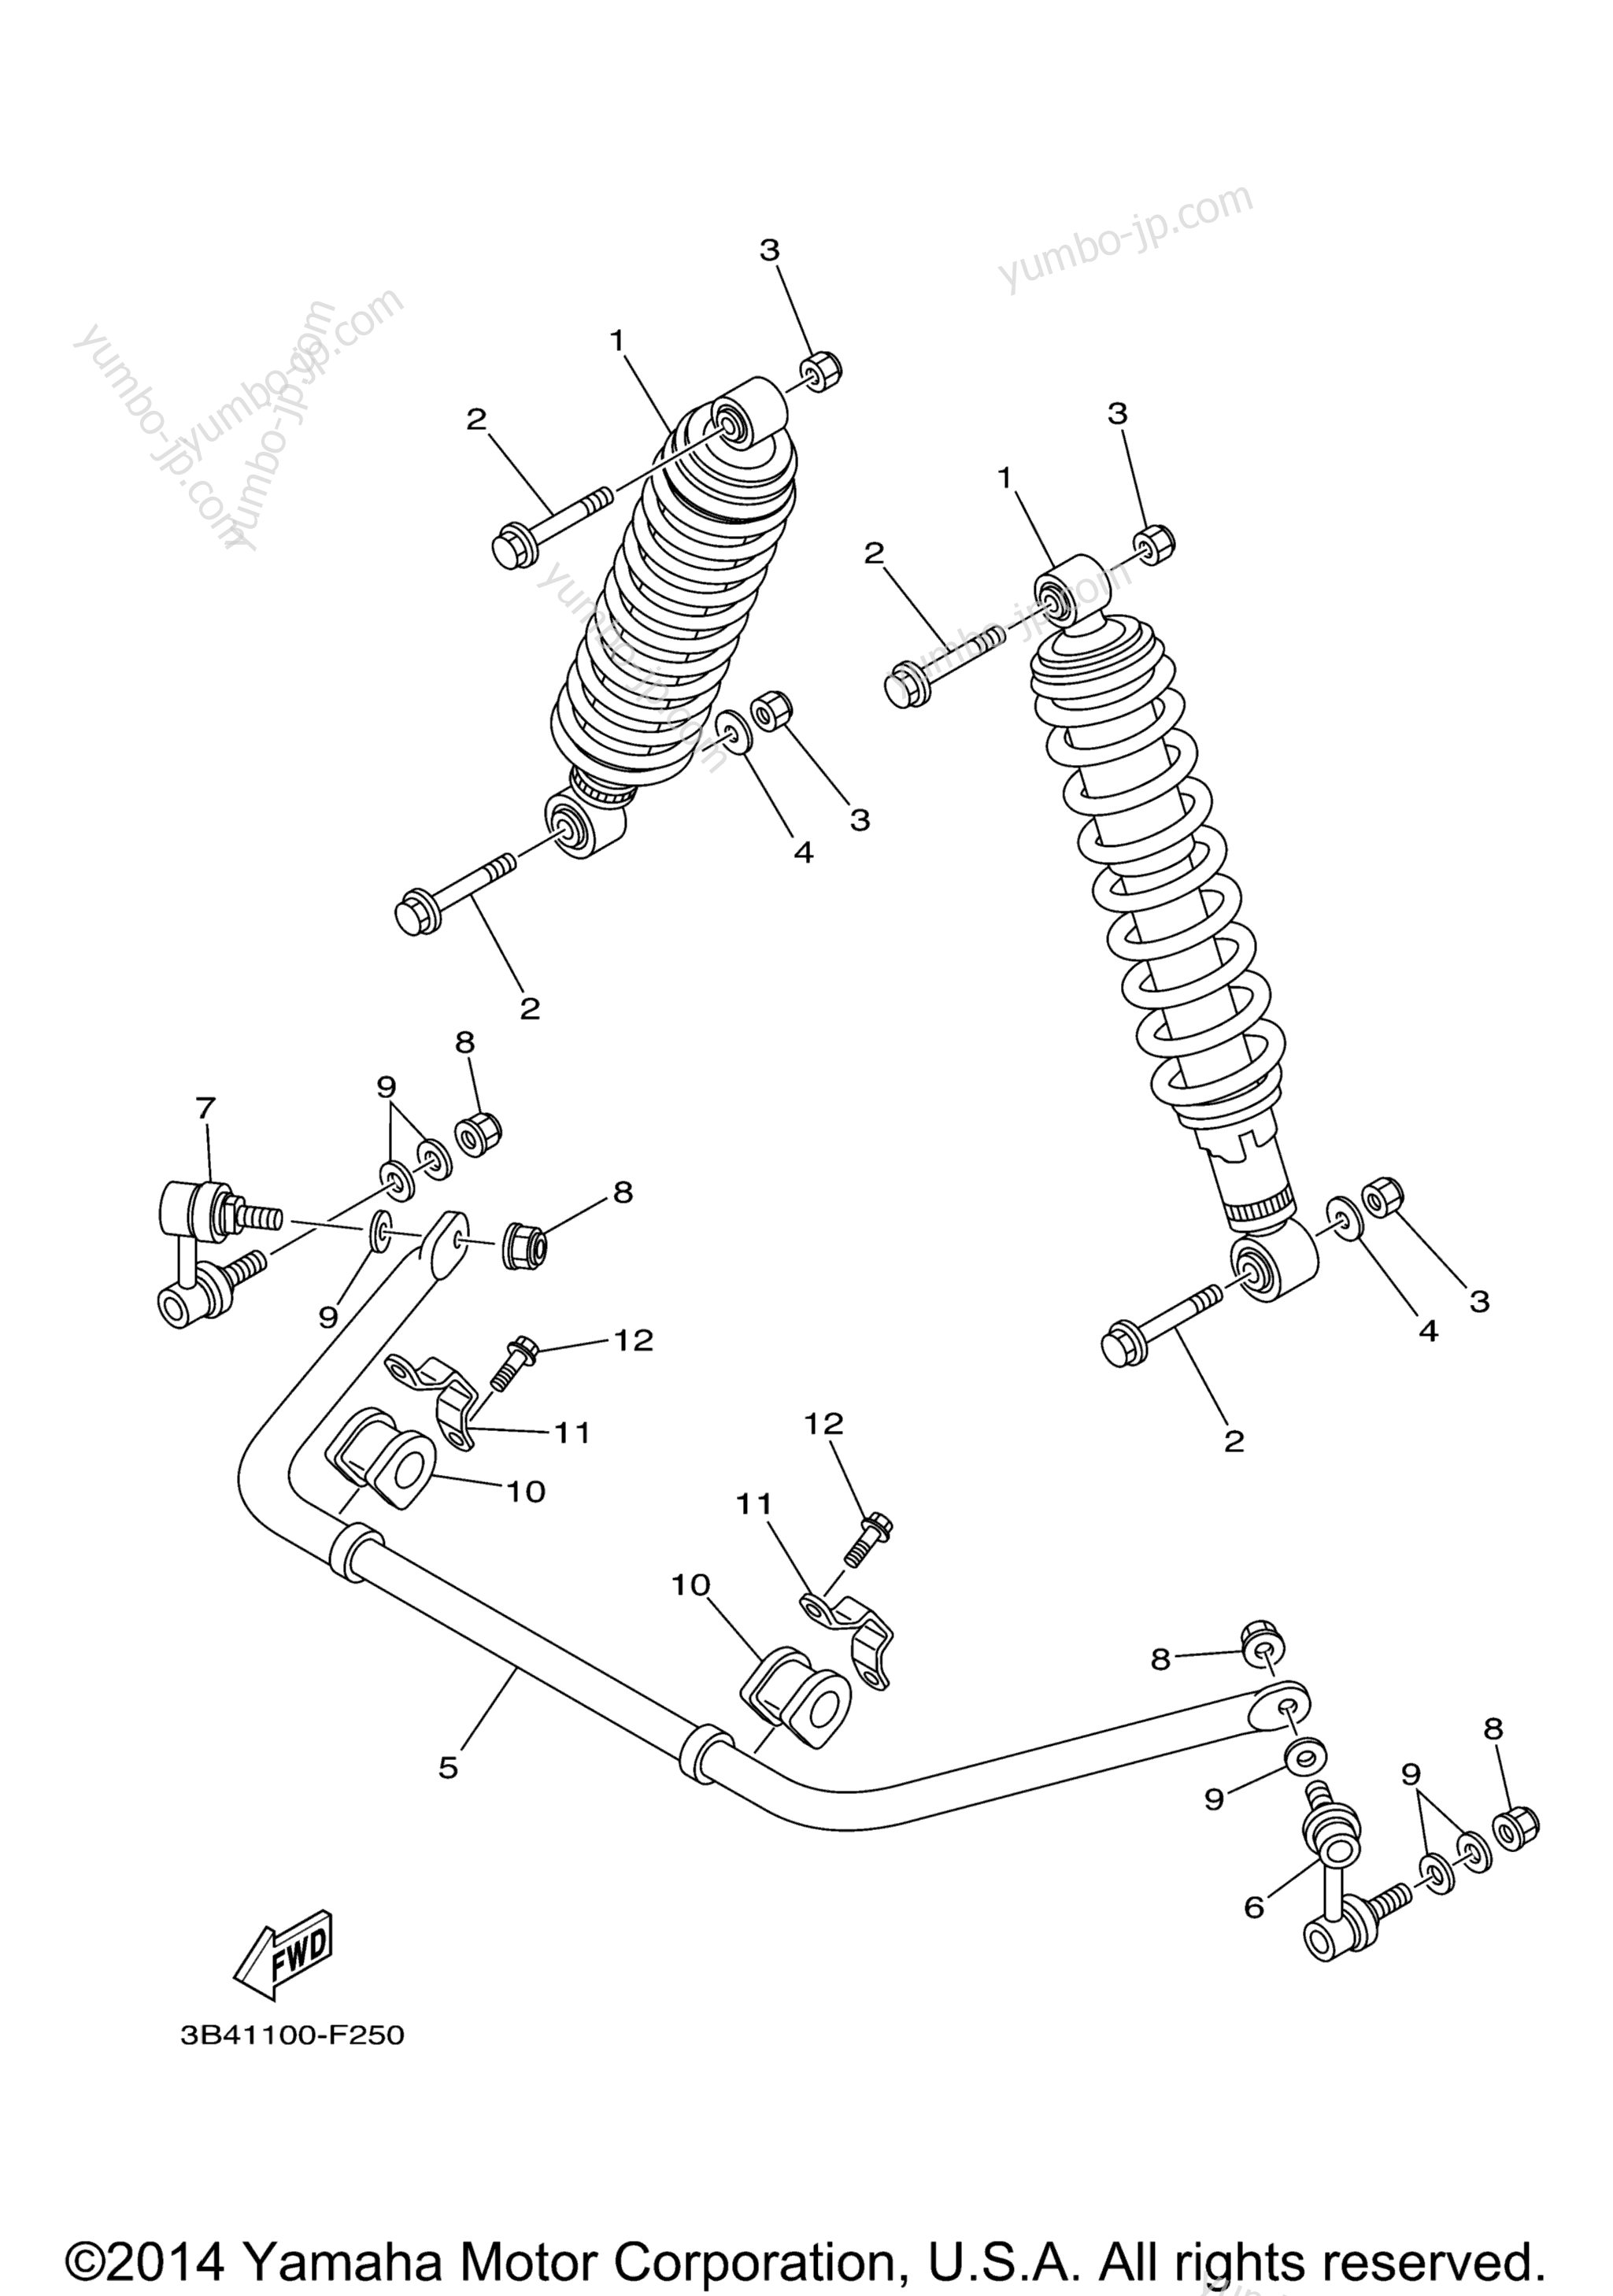 Rear Suspension for ATVs YAMAHA GRIZZLY 550 FI EPS 4WD HUNTER (YFM5FGPHZ) 2010 year